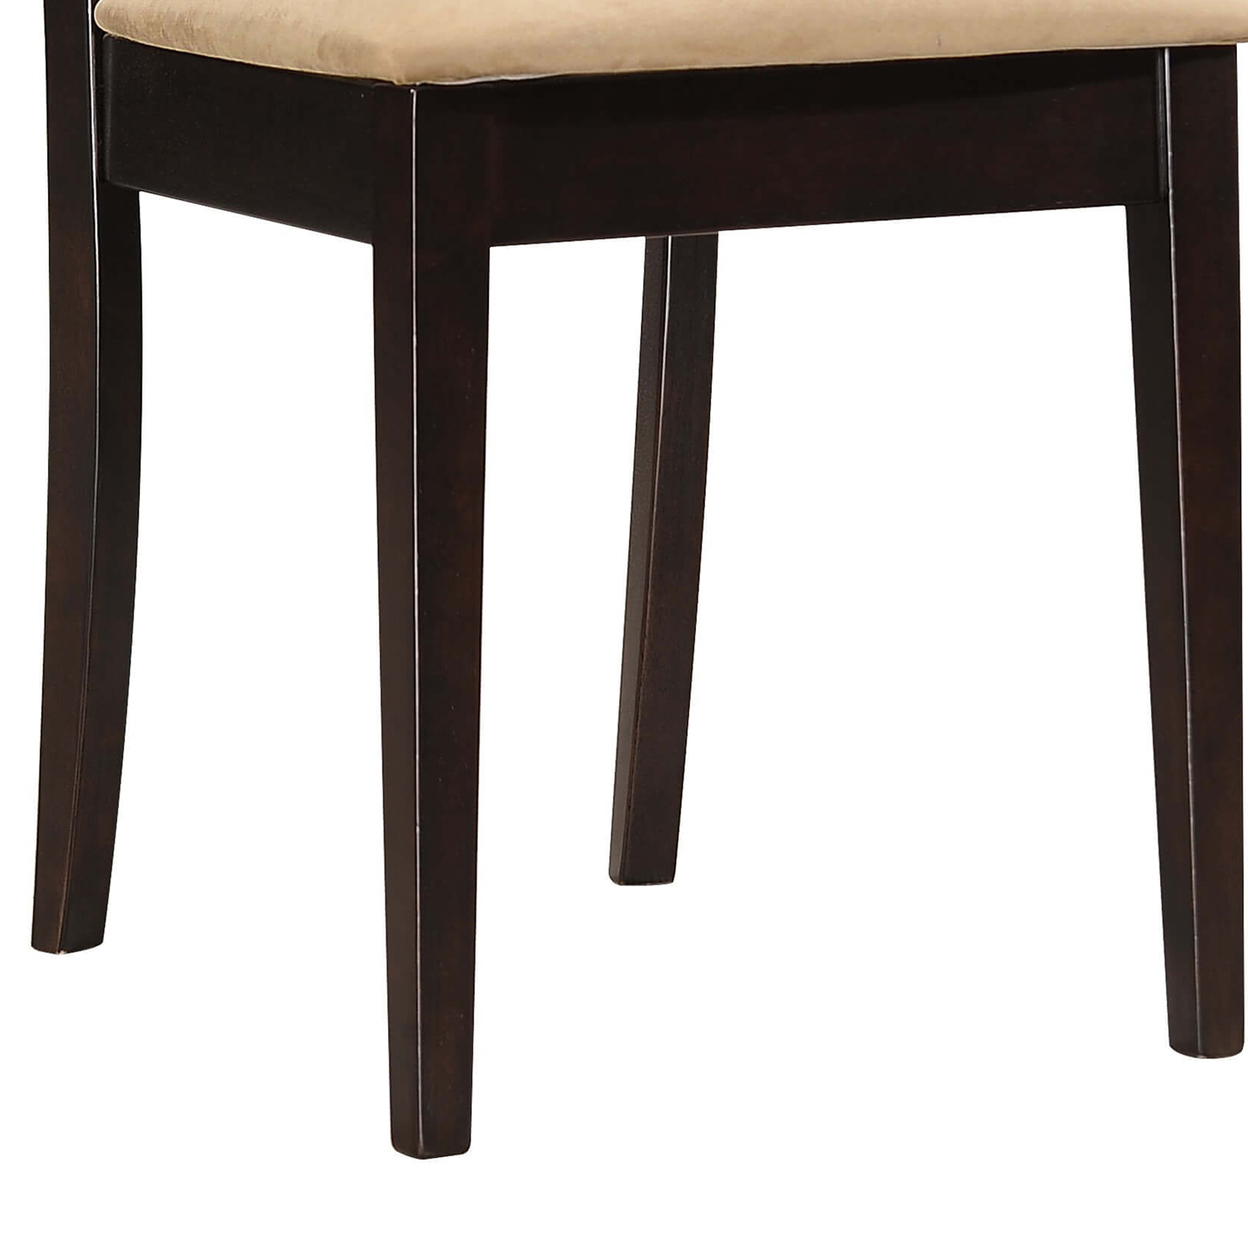 Geometric Wooden Dining Chair With Padded Seat, Set Of 2, Brown And Beige- Saltoro Sherpi